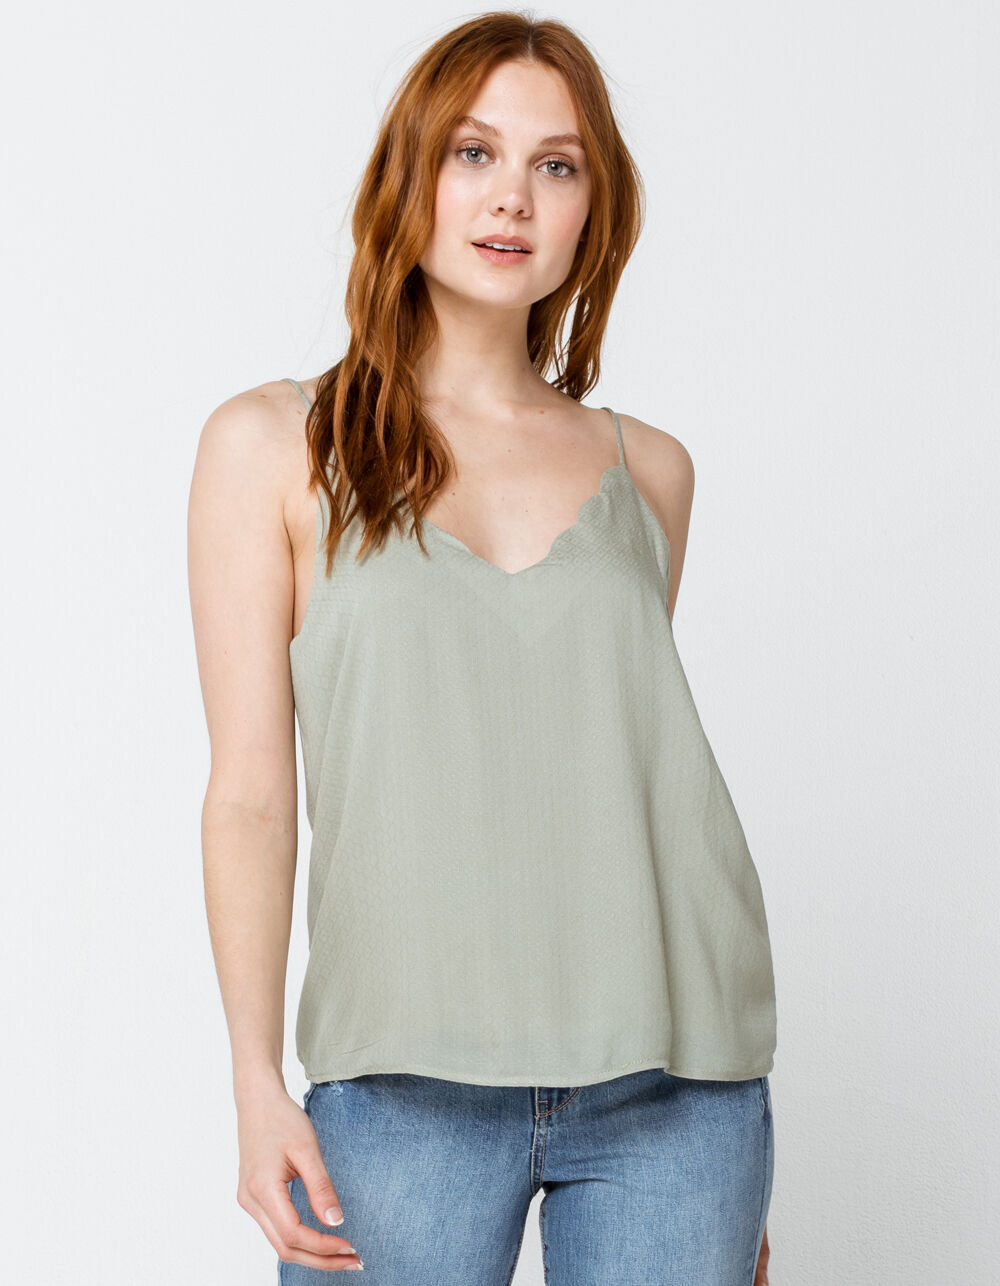 IVY & MAIN Solid Scallop Trim Womens Cami - SAGE | Tillys